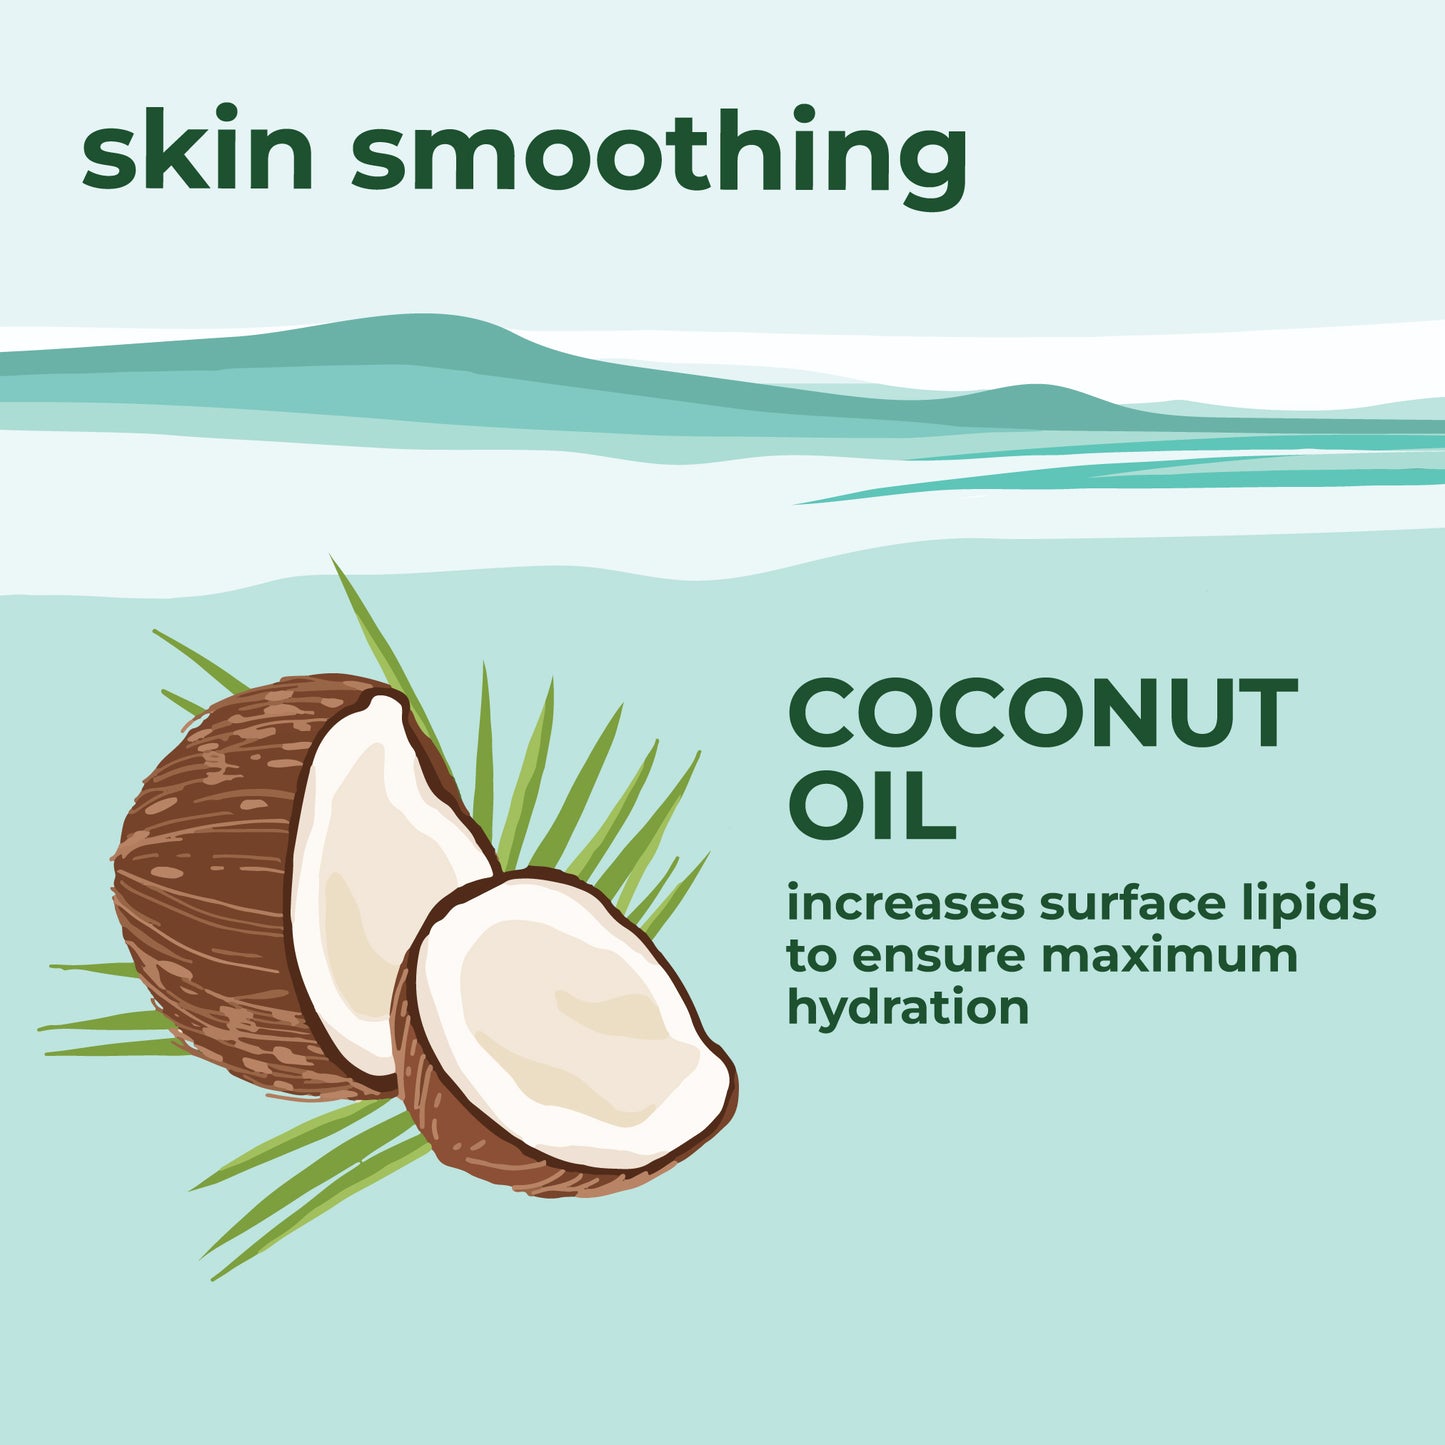 Smoothing Body Scrub with Coconut Oil